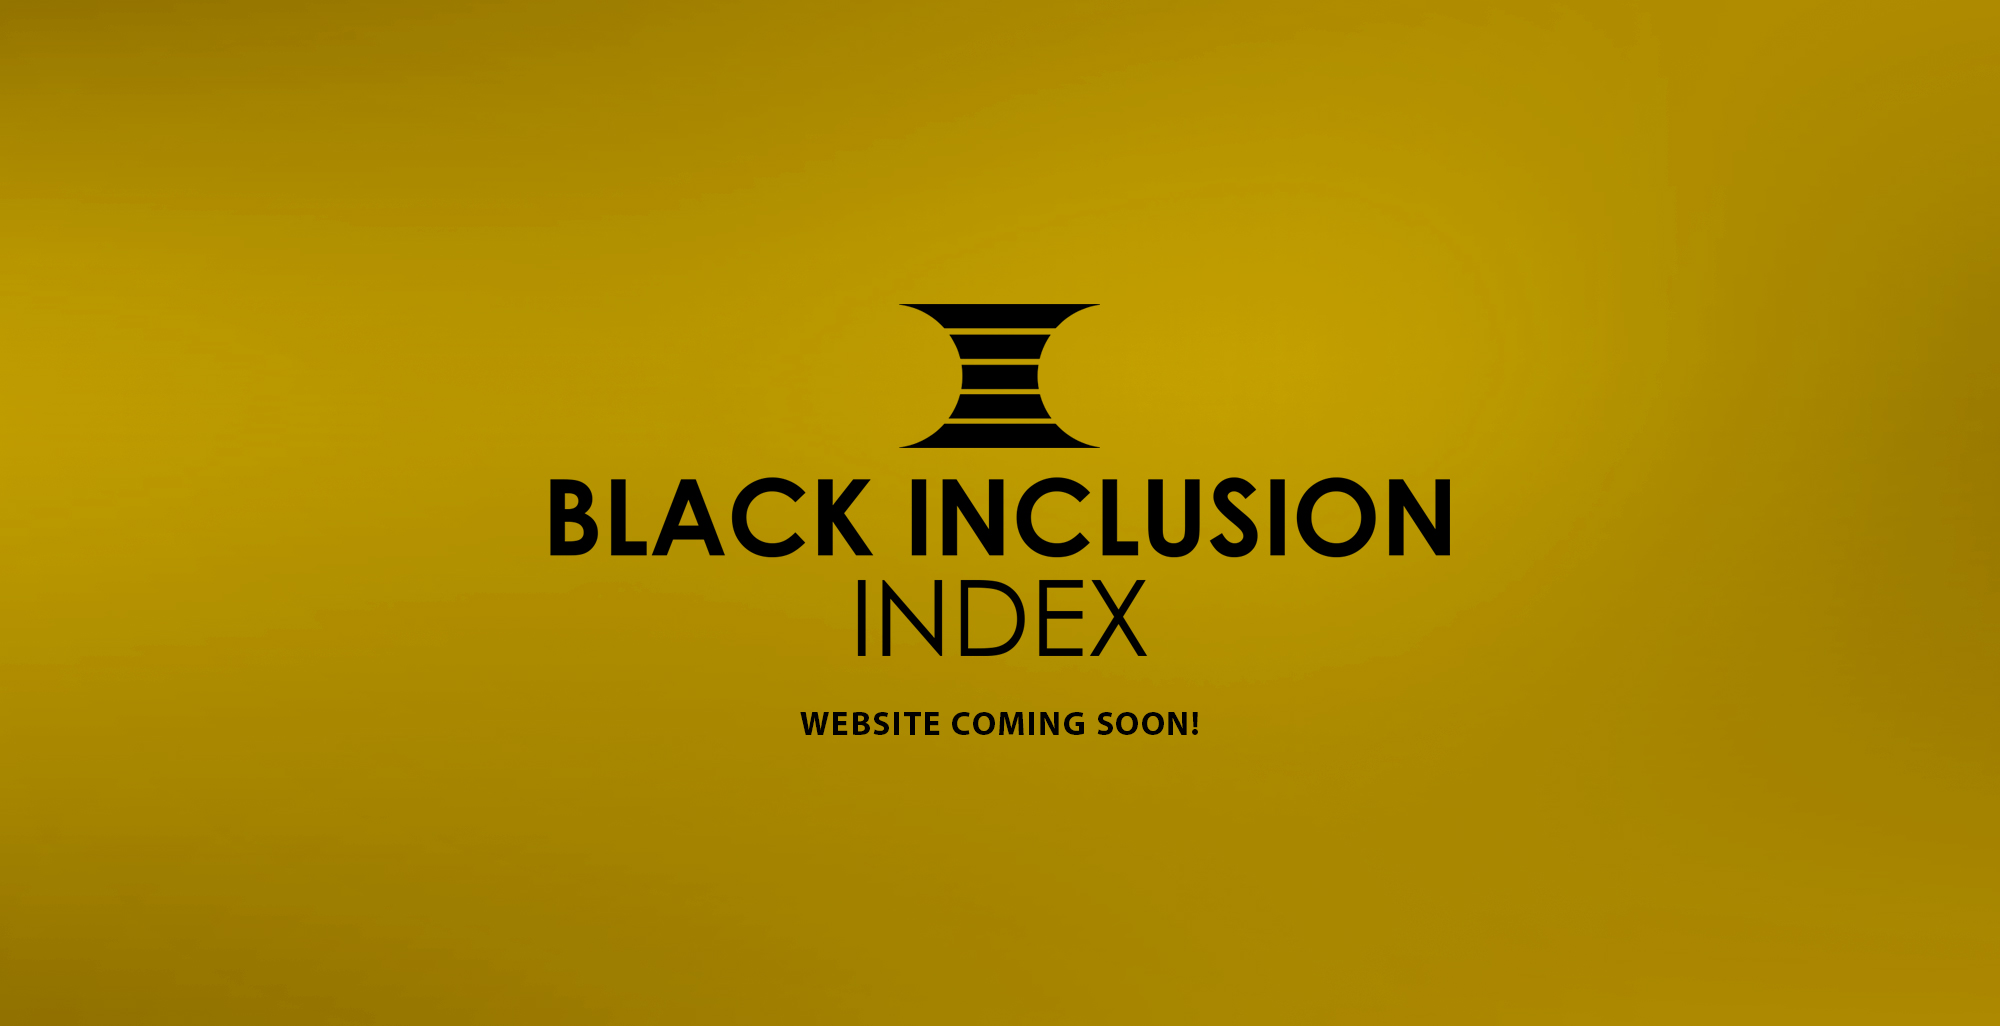 Black Inclusion Index is coming soon